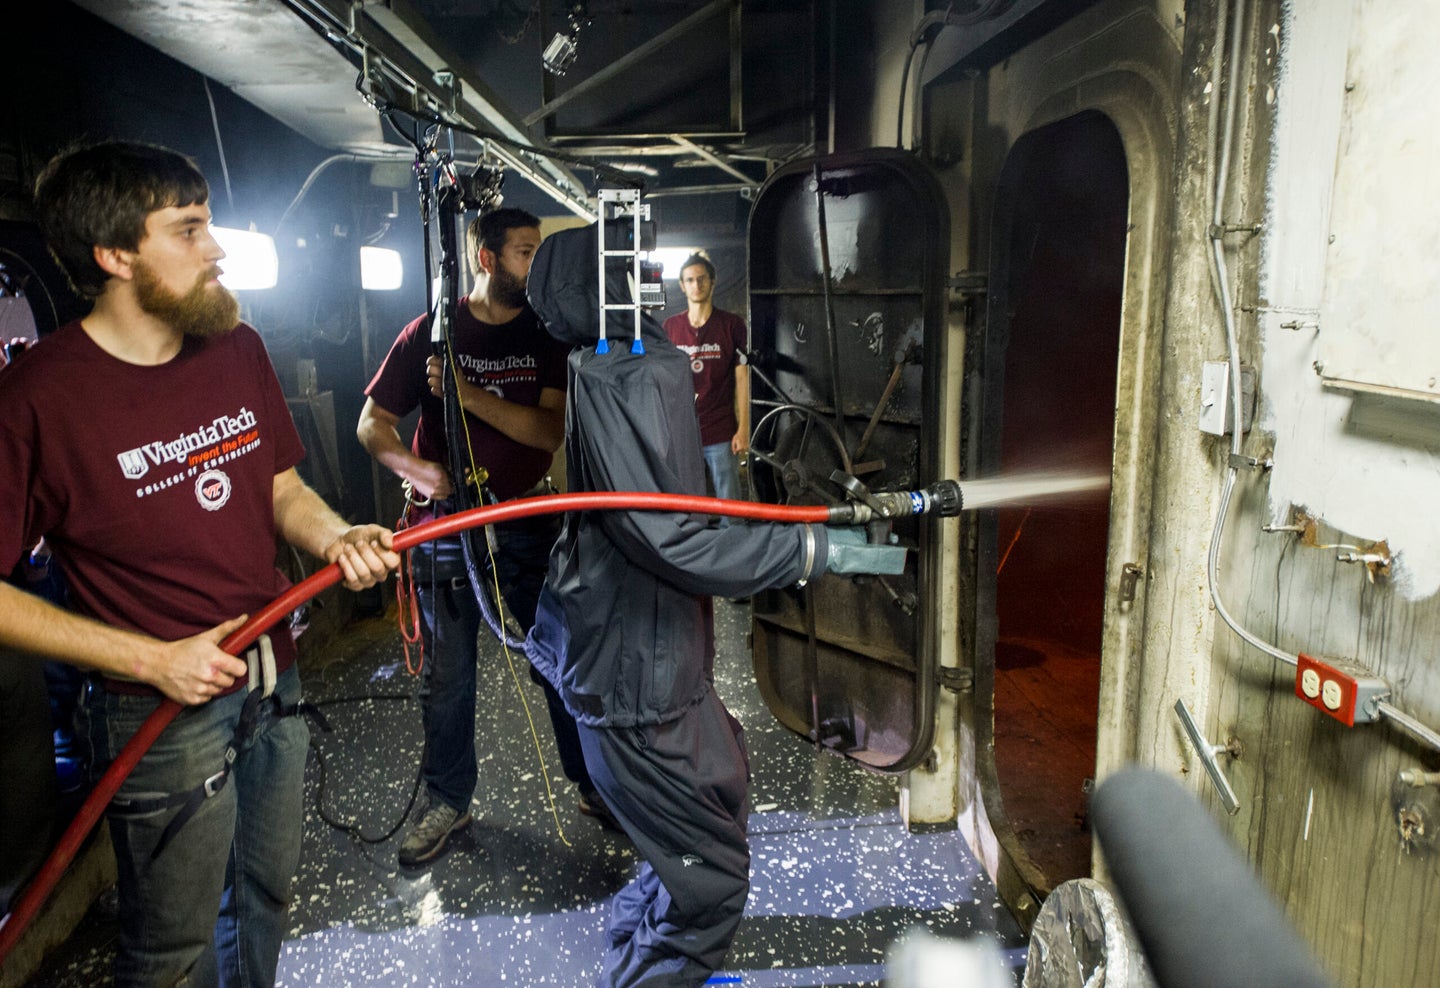 141106-N-PO203-059 MOBILE, Ala. (Nov. 6, 2014) Coleman Knabe, a graduate student at Virginia Tech, assists as the Office of Naval Research-sponsored Shipboard Autonomous Firefighting Robot (SAFFiR) extinguishes a fire during testing aboard the Naval Research Laboratory's ex-USS Shadwell located in Mobile, Alabama. SAFFiR is a bipedal humanoid robot being developed to assist Sailors with damage control and inspection operations aboard naval vessels. (U.S. Navy photo by John F. Williams/Released)